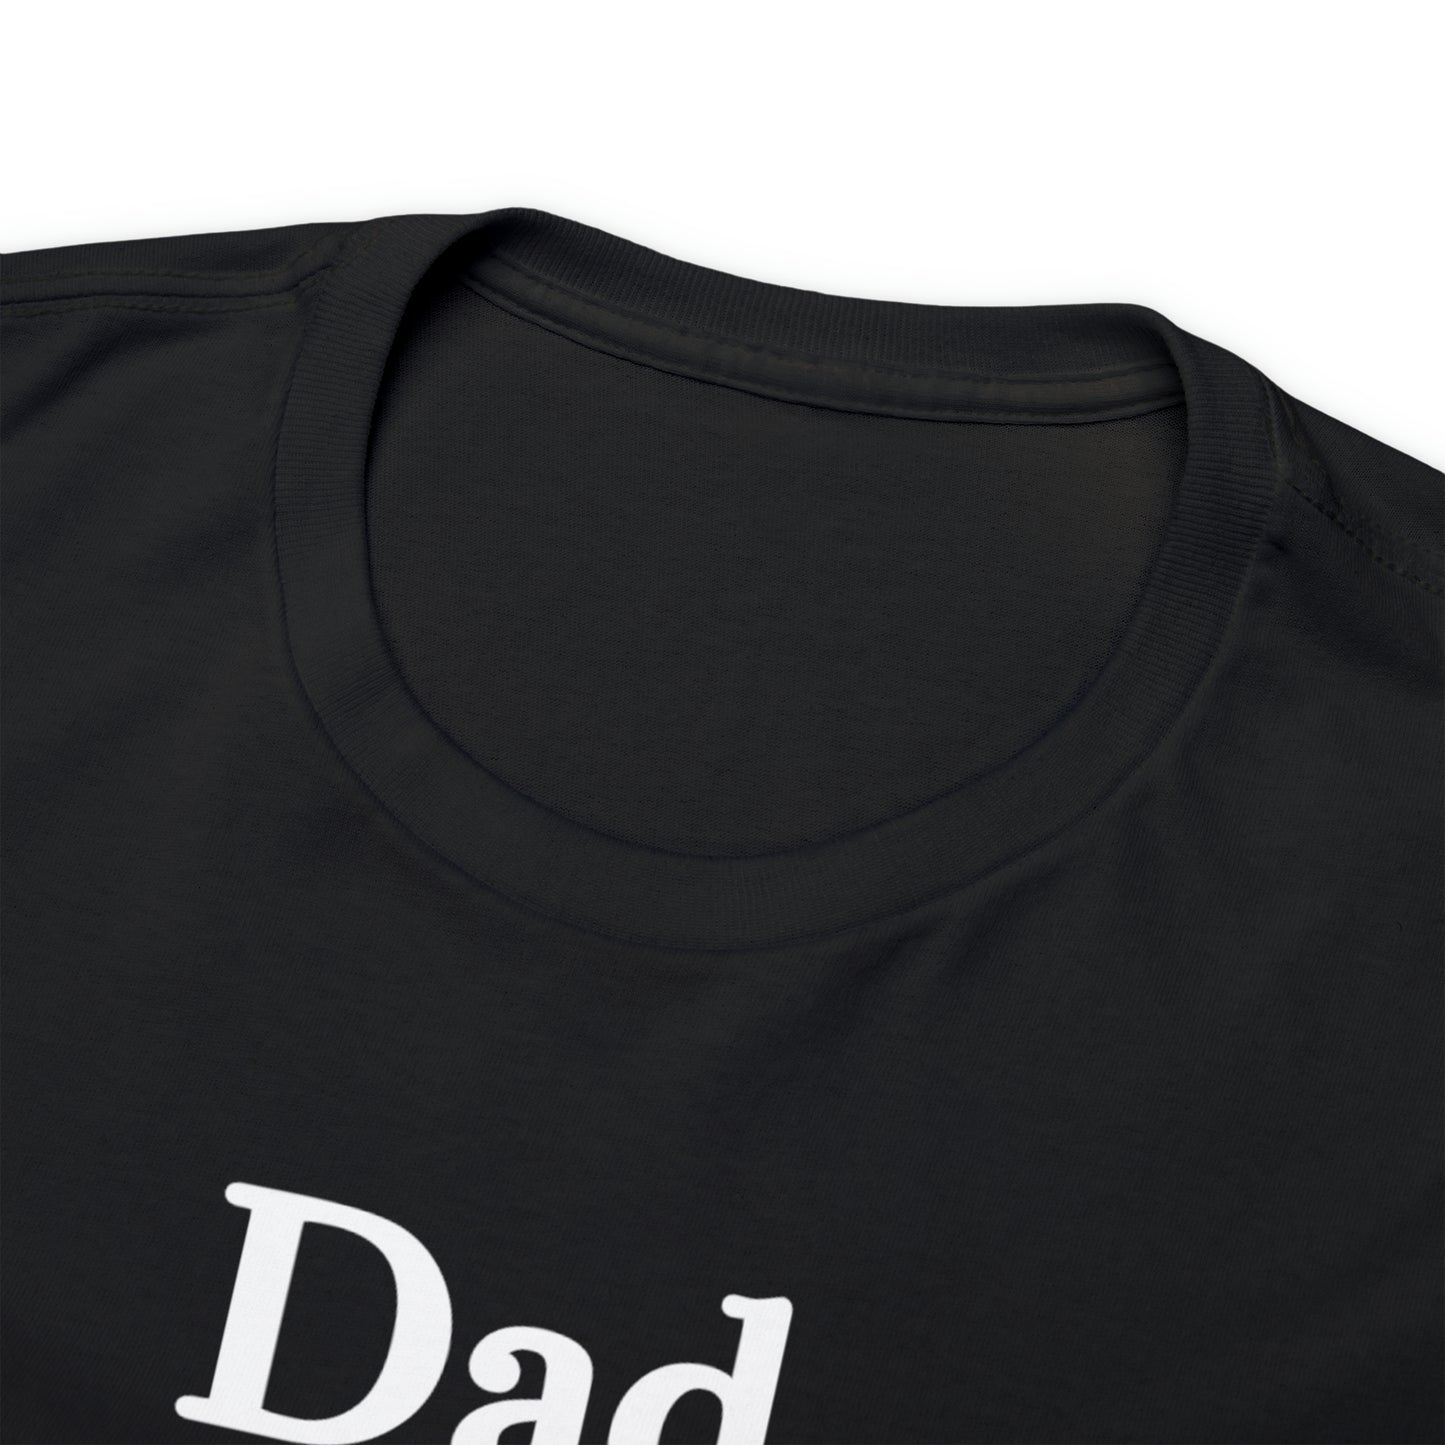 Dad & Boujee Shirt for Dad Great Father's day gift for Dad, a Dad and Boujee T-Shirt